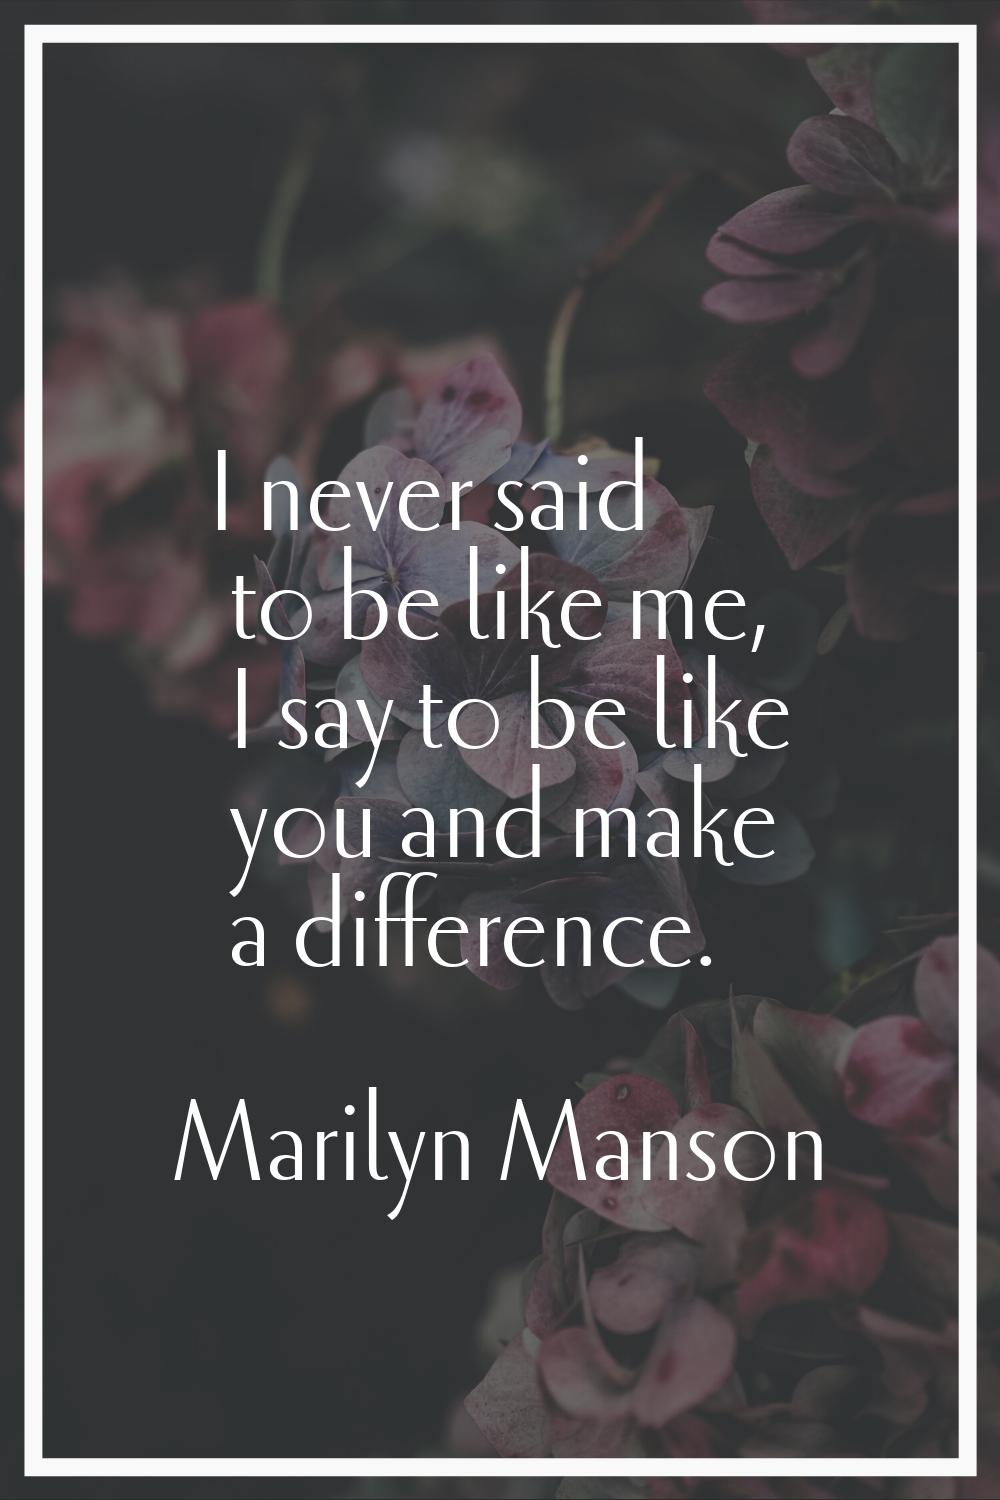 I never said to be like me, I say to be like you and make a difference.